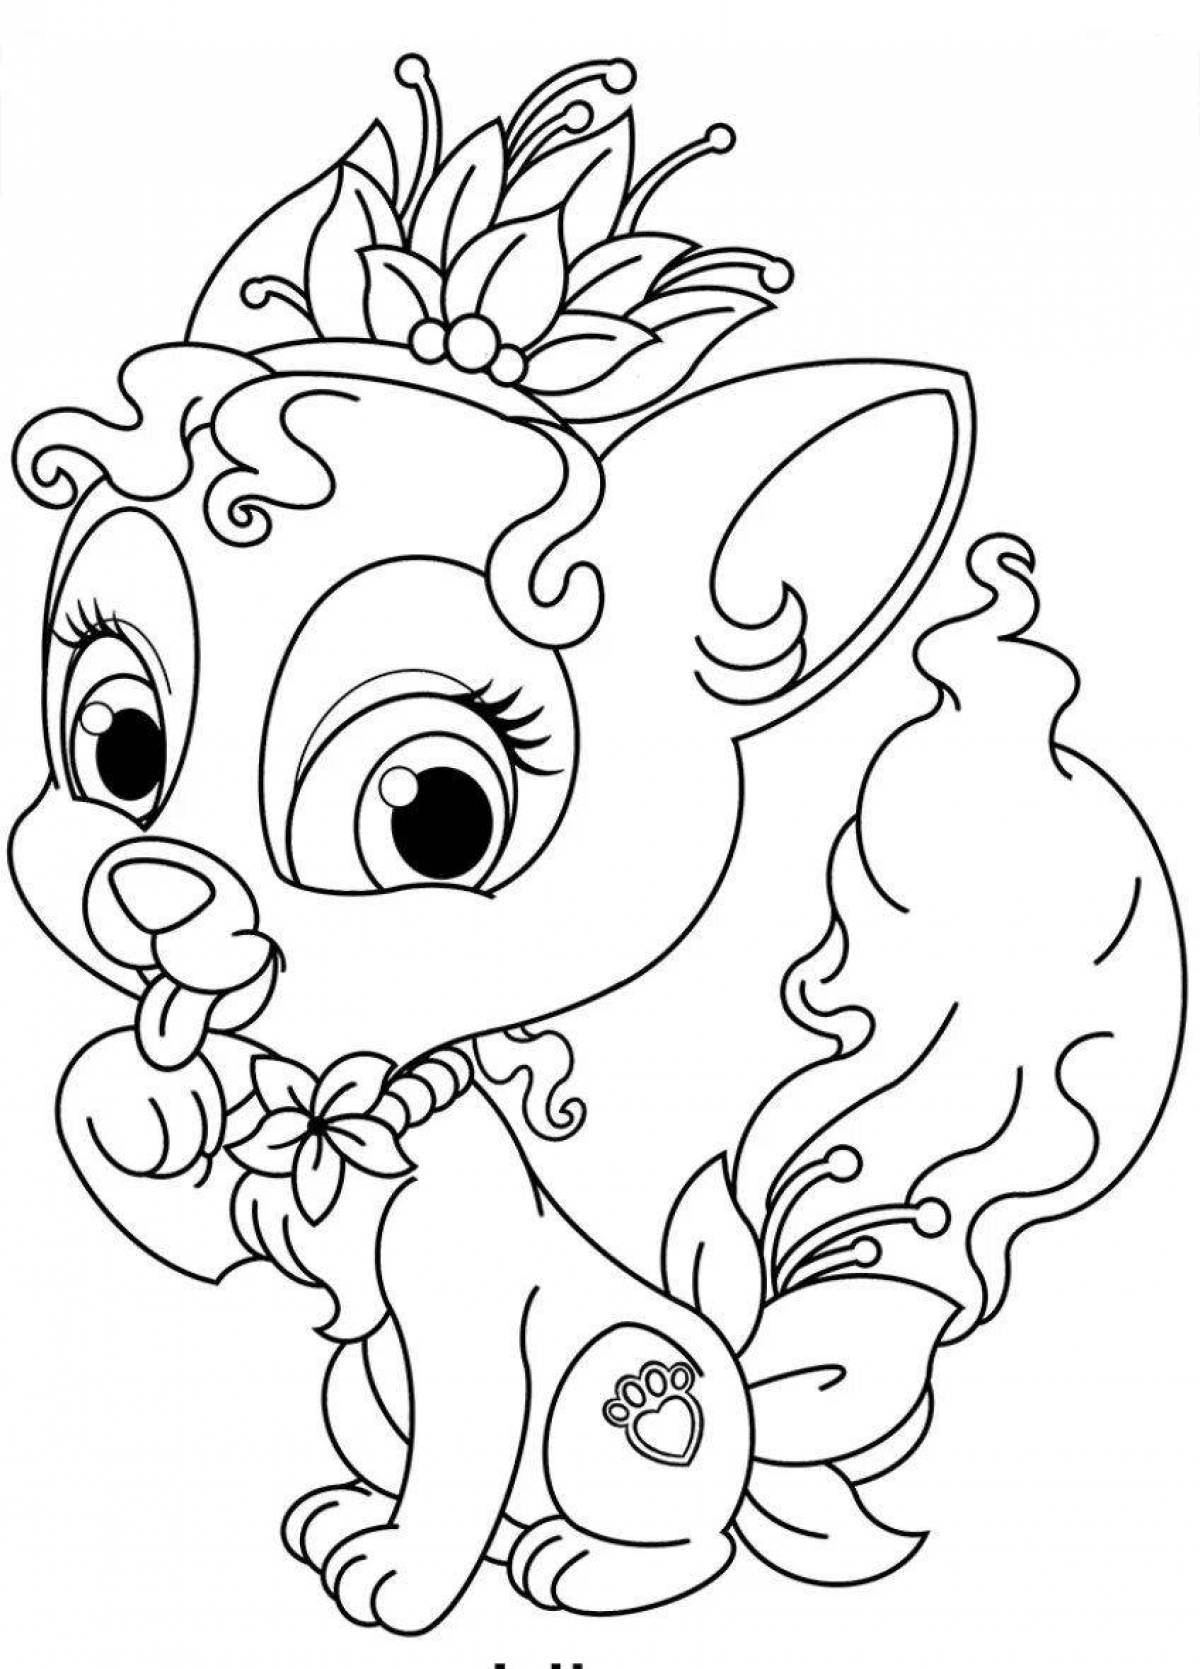 Sweet lily kitty coloring book